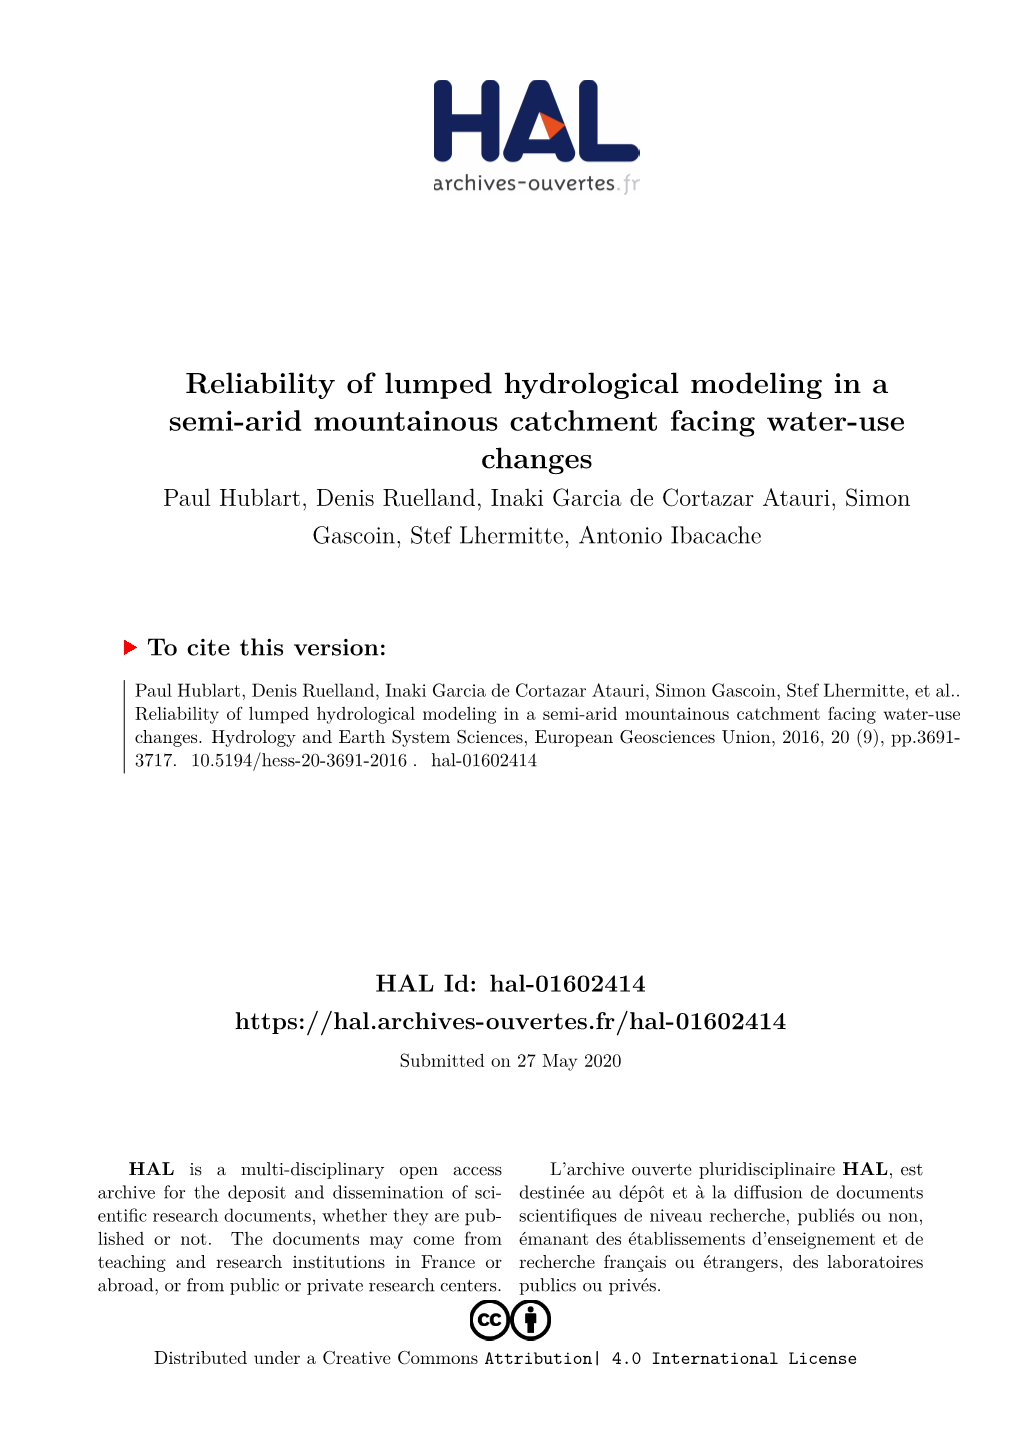 Reliability of Lumped Hydrological Modeling in a Semi-Arid